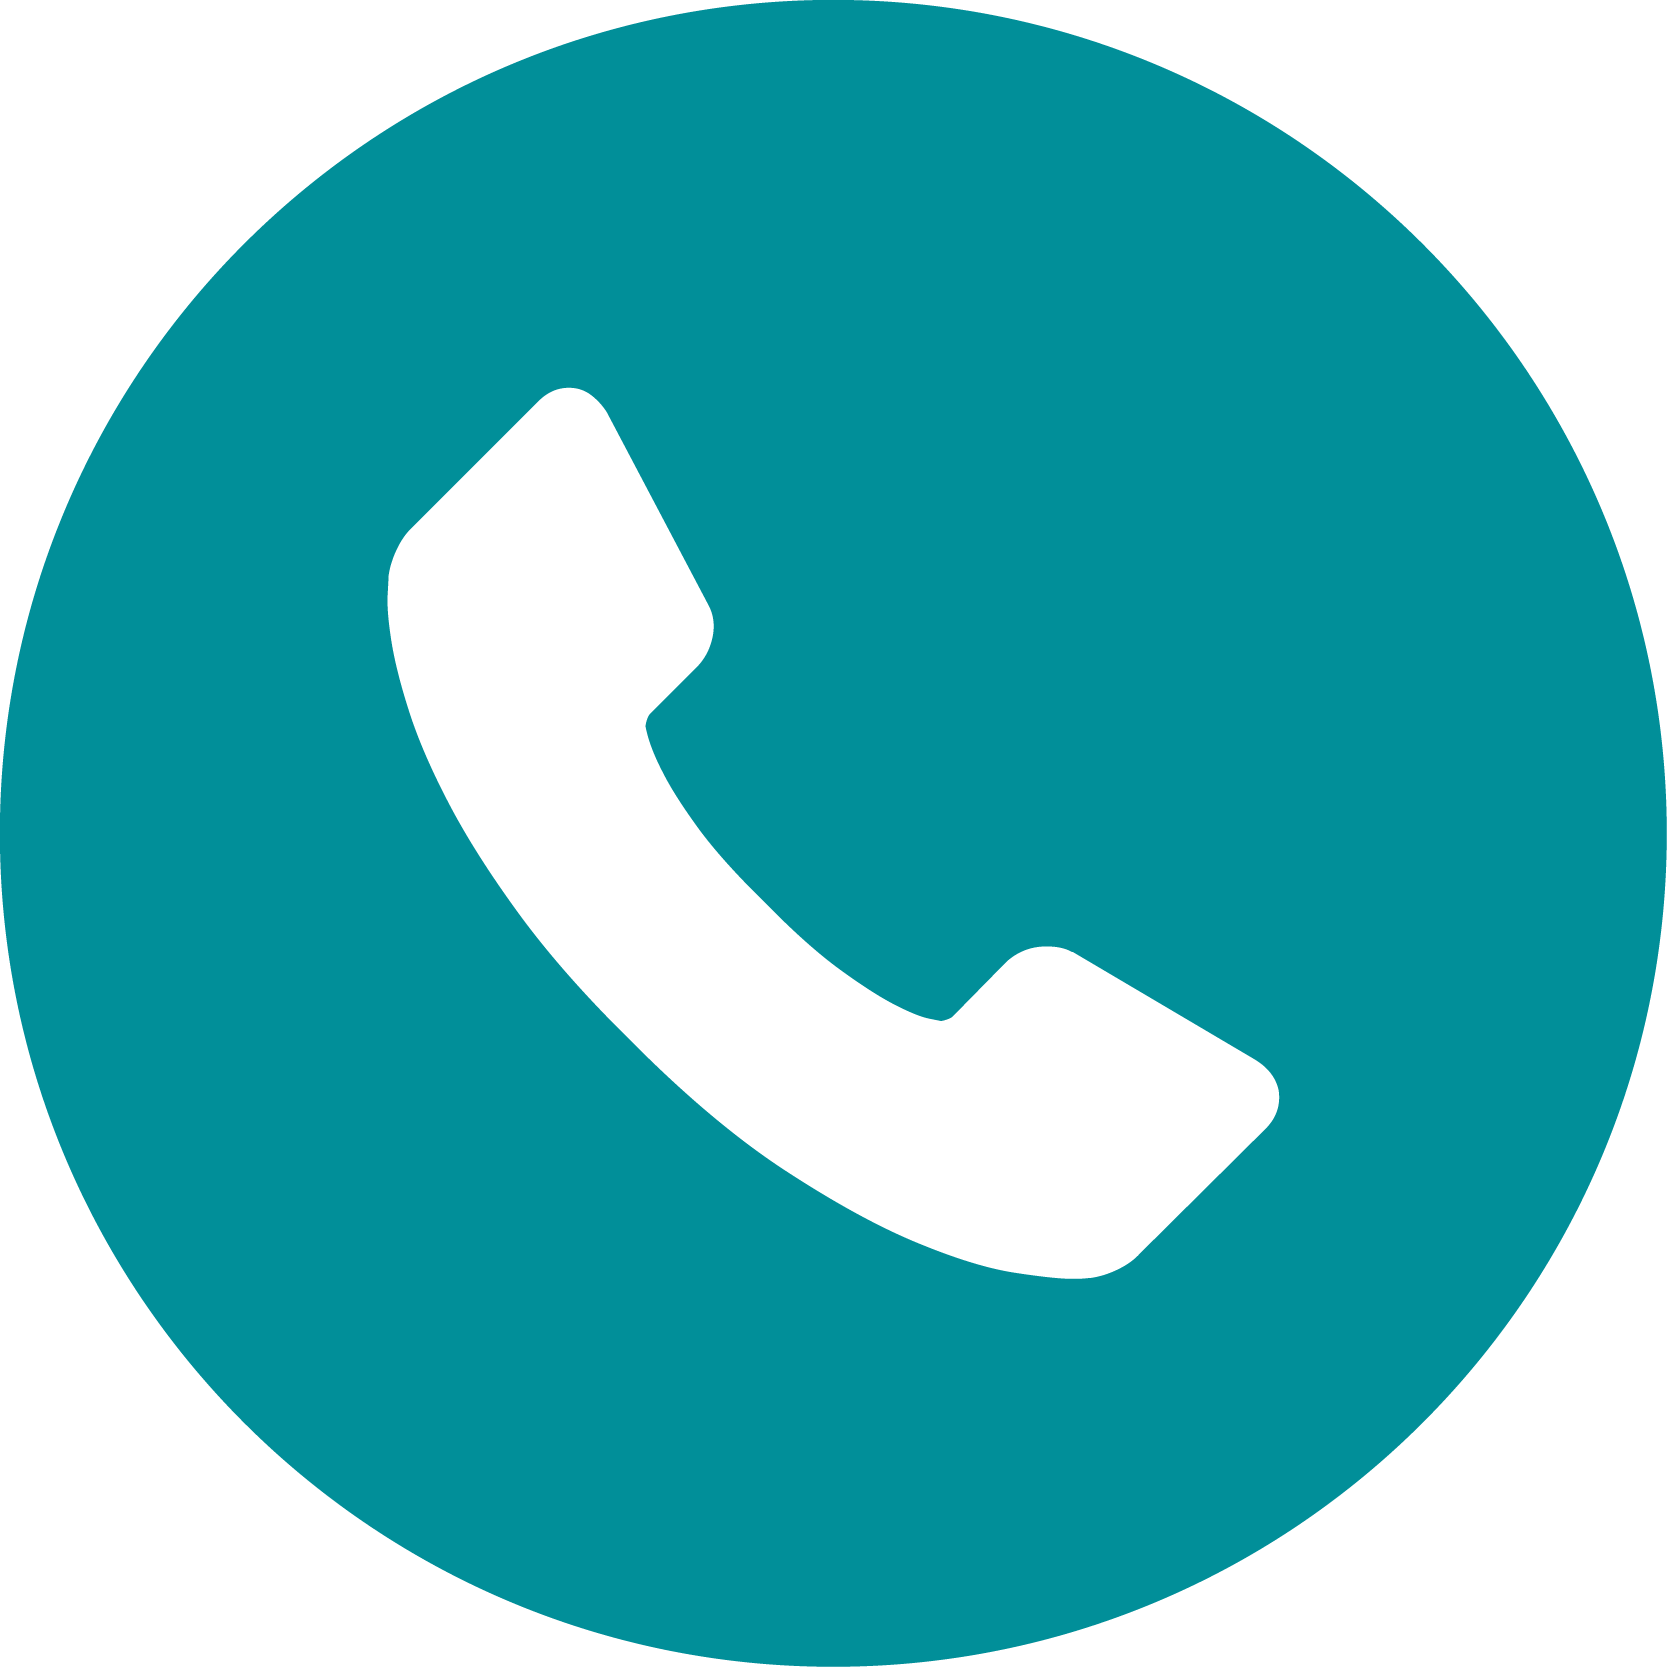 Phone Call PNG HD Transparent Phone Call HD.PNG Images. | PlusPNG